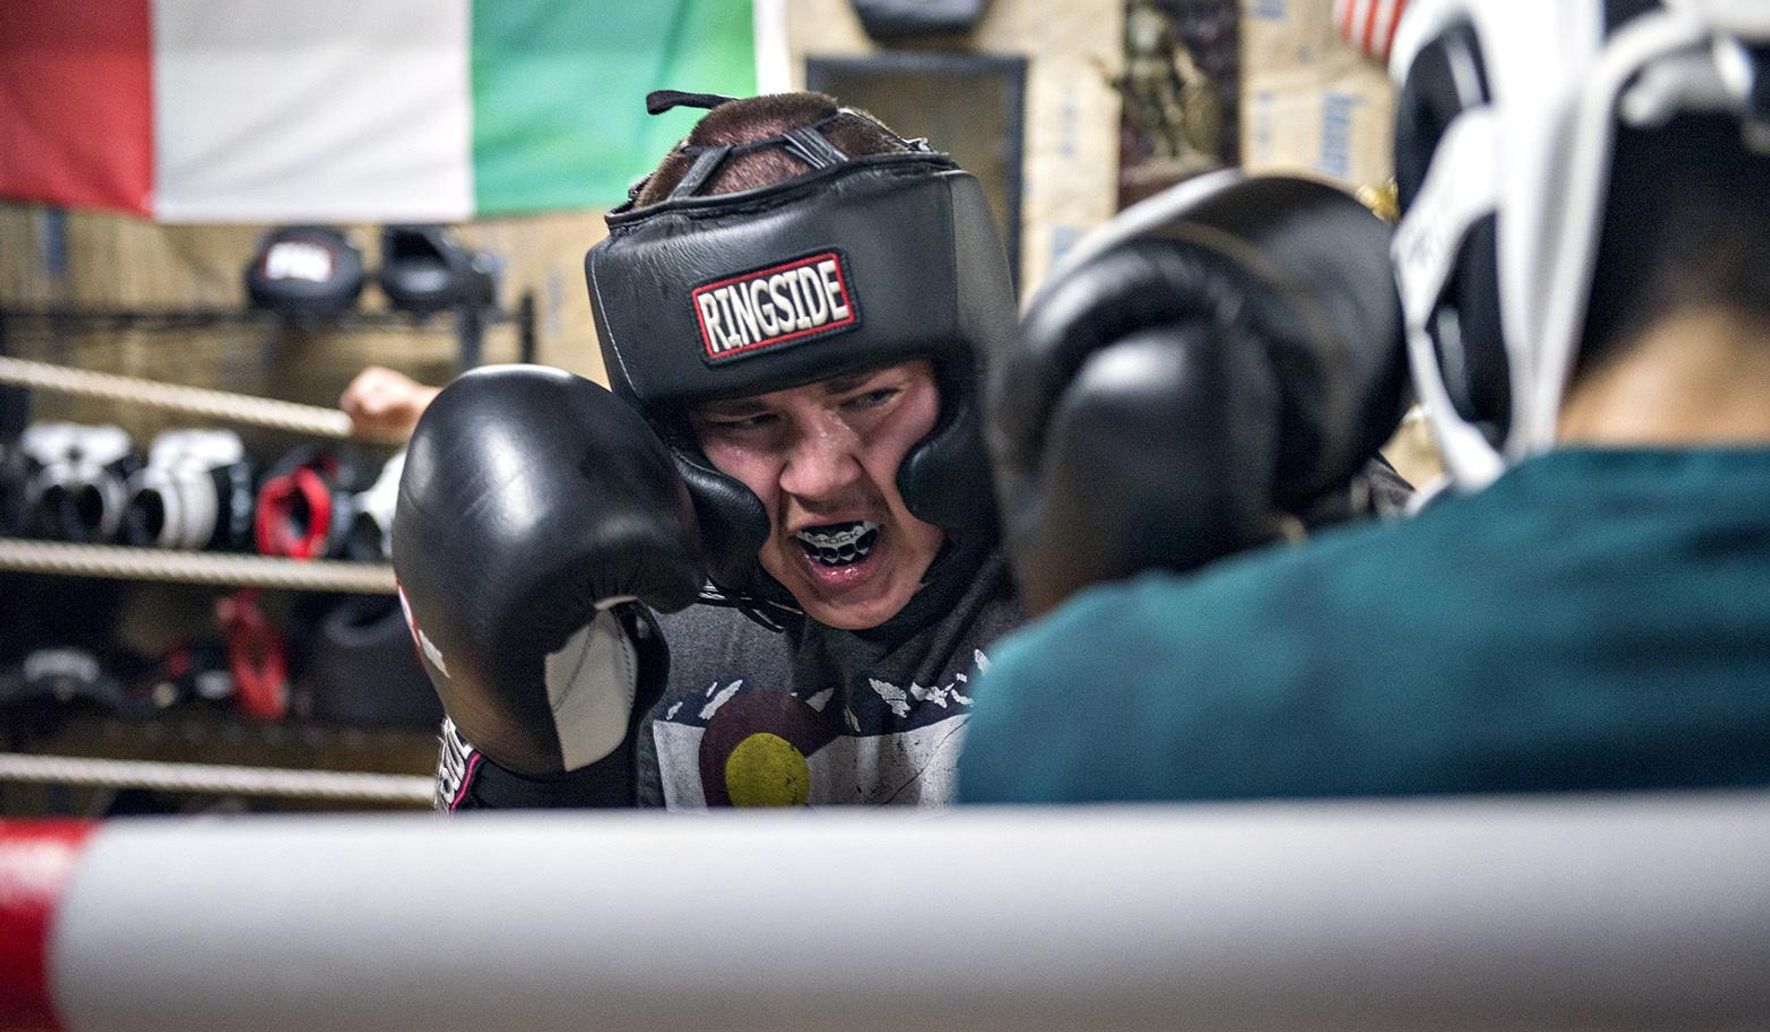 Sterling enthusiast opens boxing club in his garage